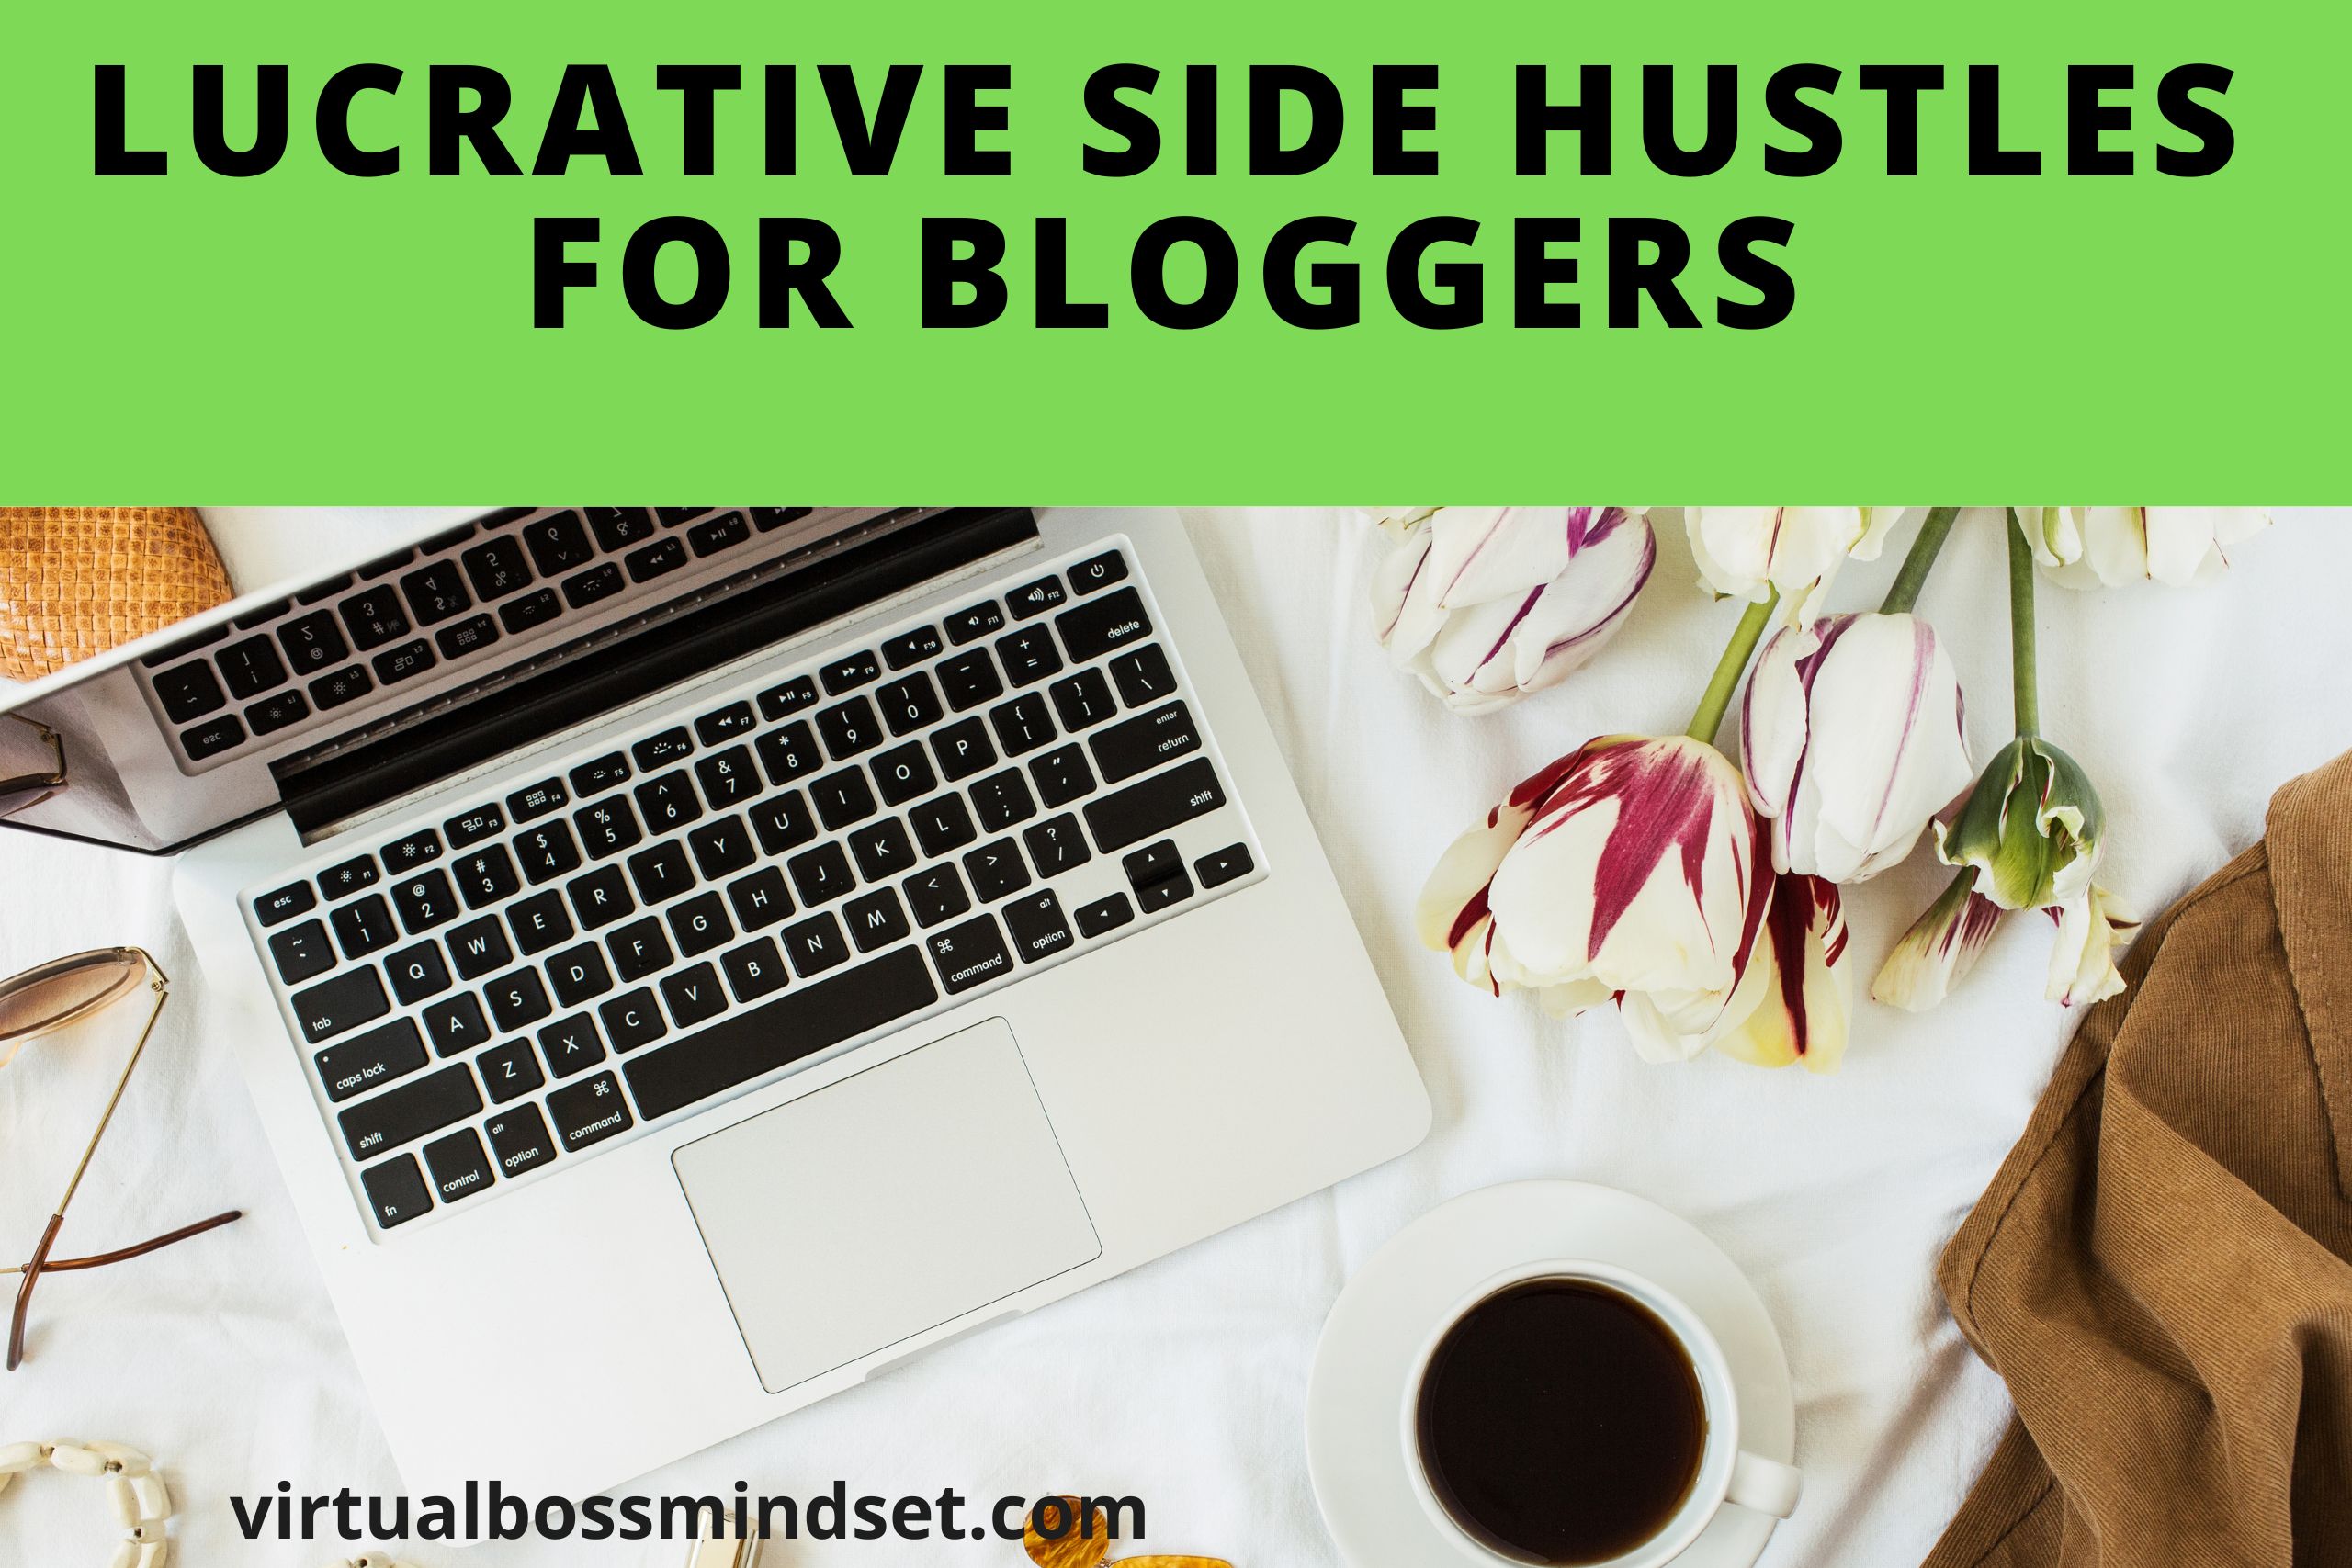 7 Lucrative Side Hustles for Bloggers to Make Extra Money